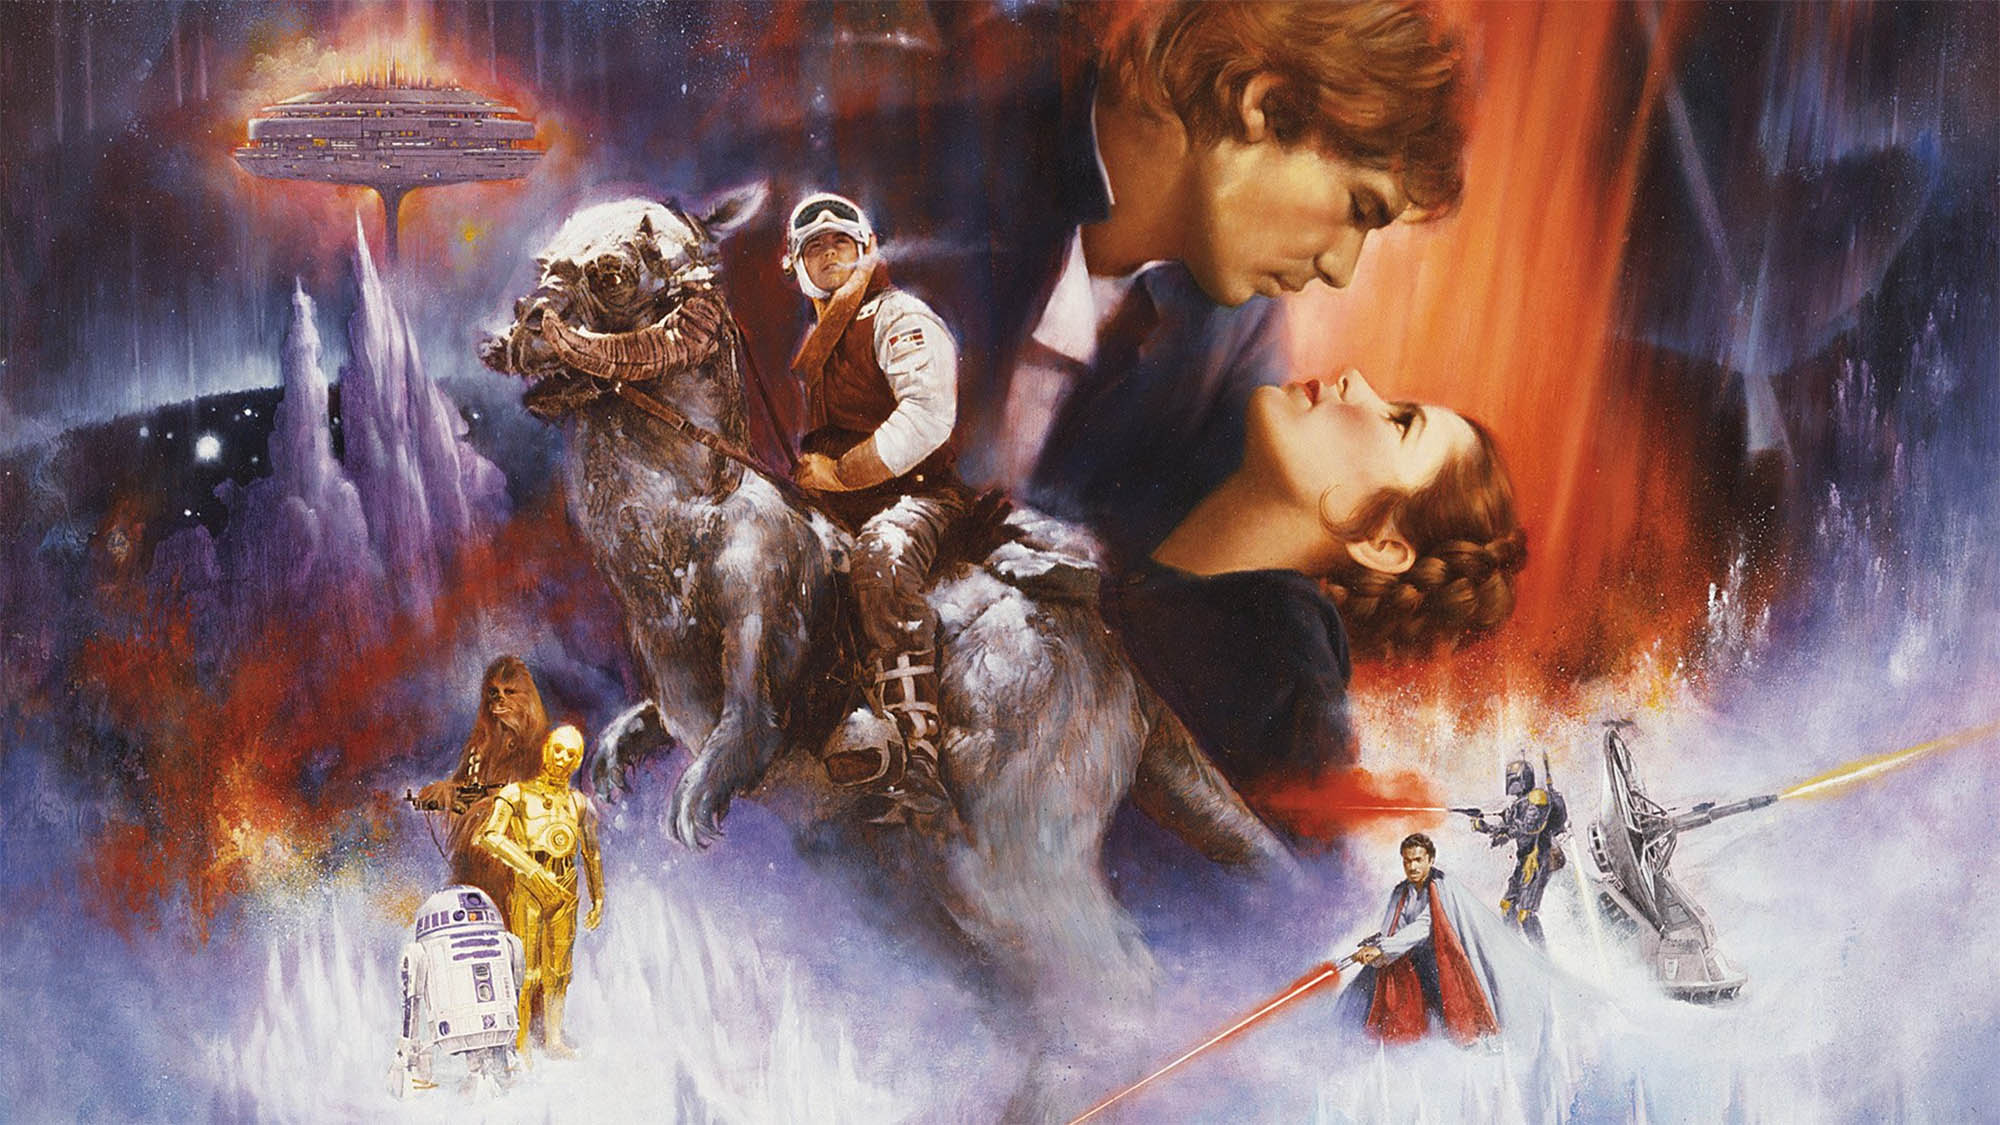 Loving something means admitting to its many flaws. Embrace the blunders as we rank the ten worst ever 'Star Wars' film series moments.